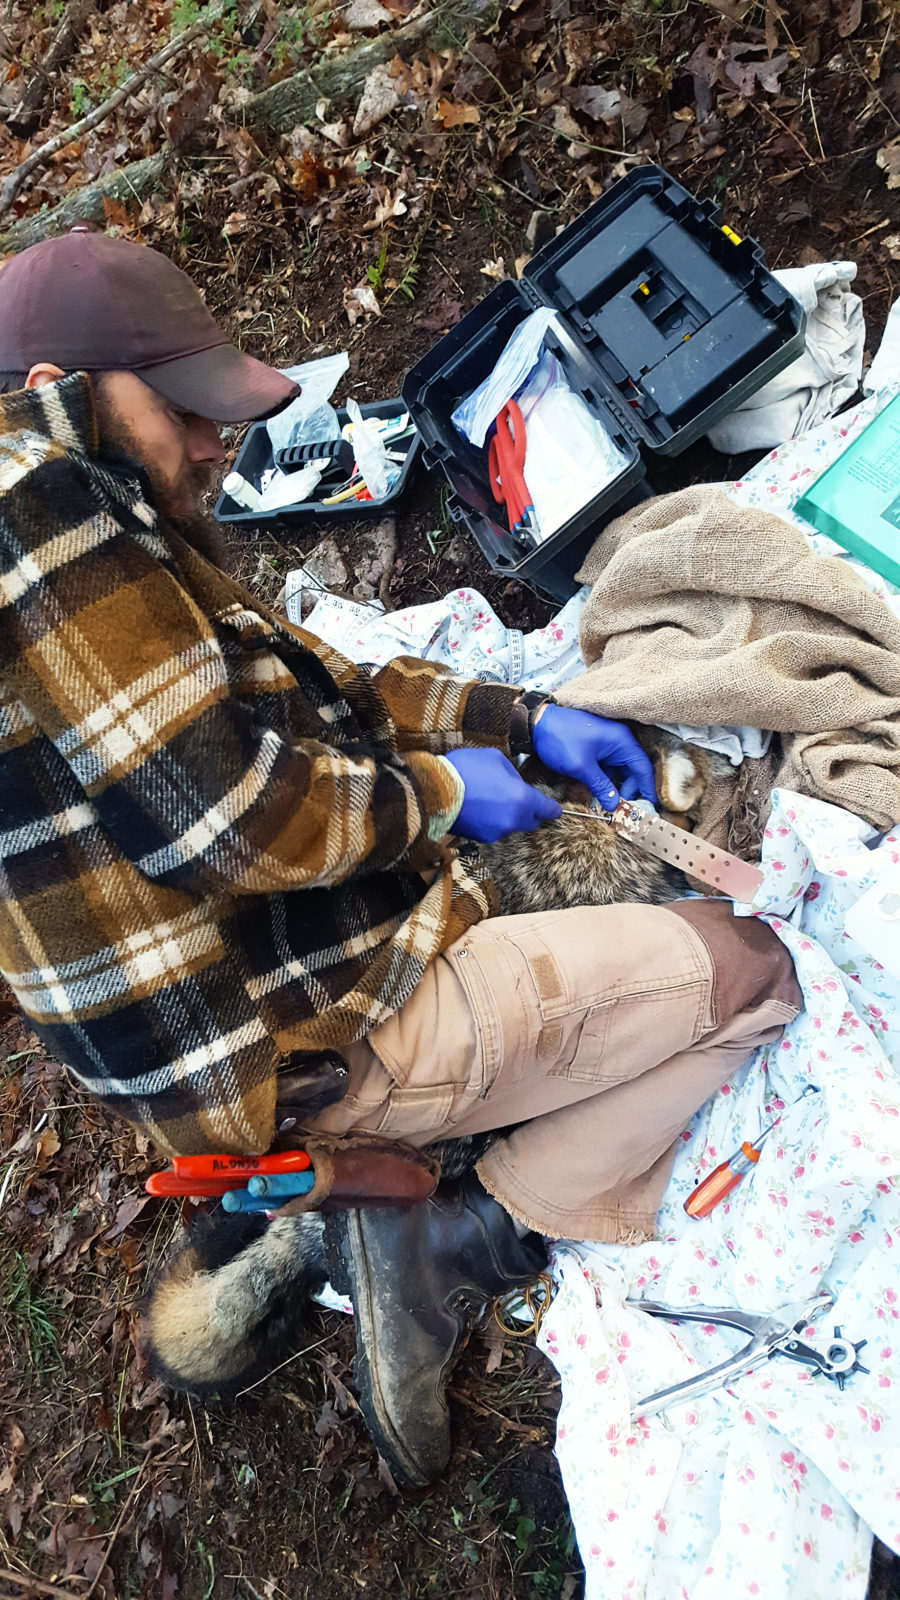 Robert Alonso attaches a GPS collar to one of the 17 coyotes that have been trapped.